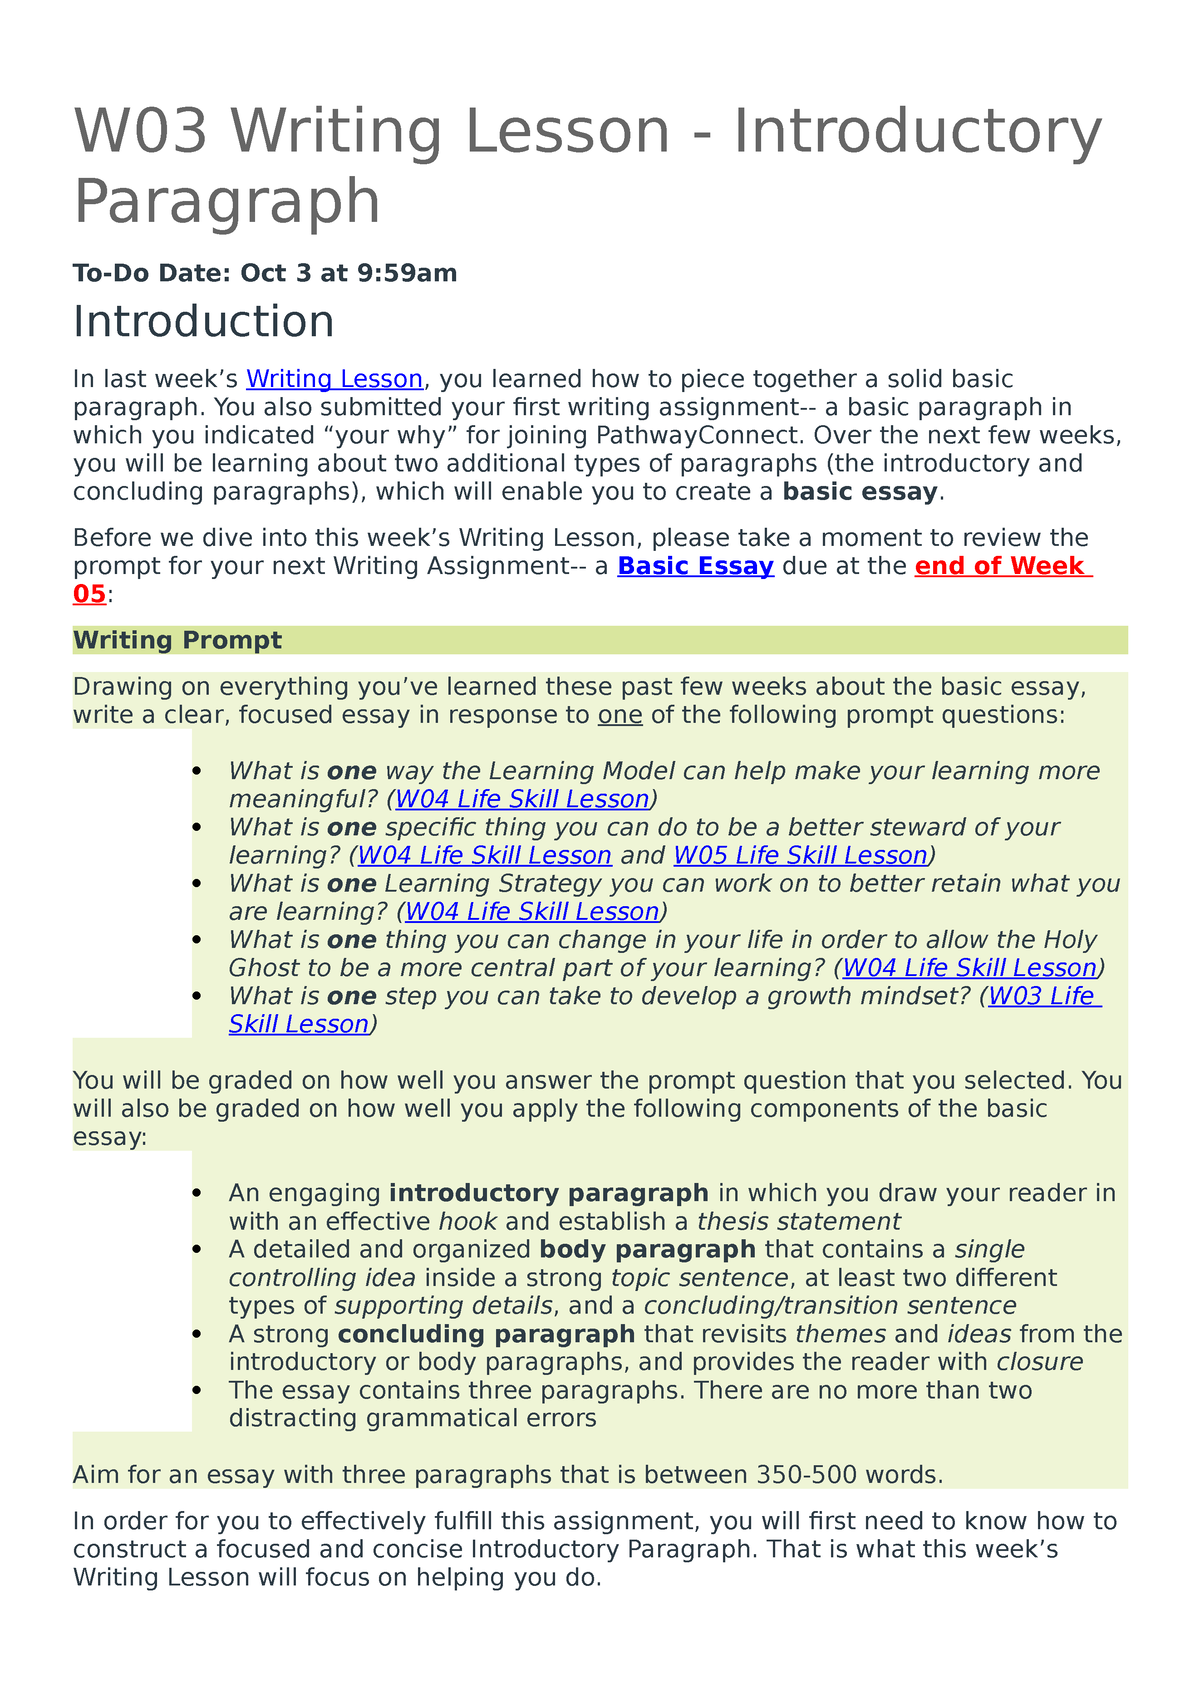 how to do an introduction paragraph